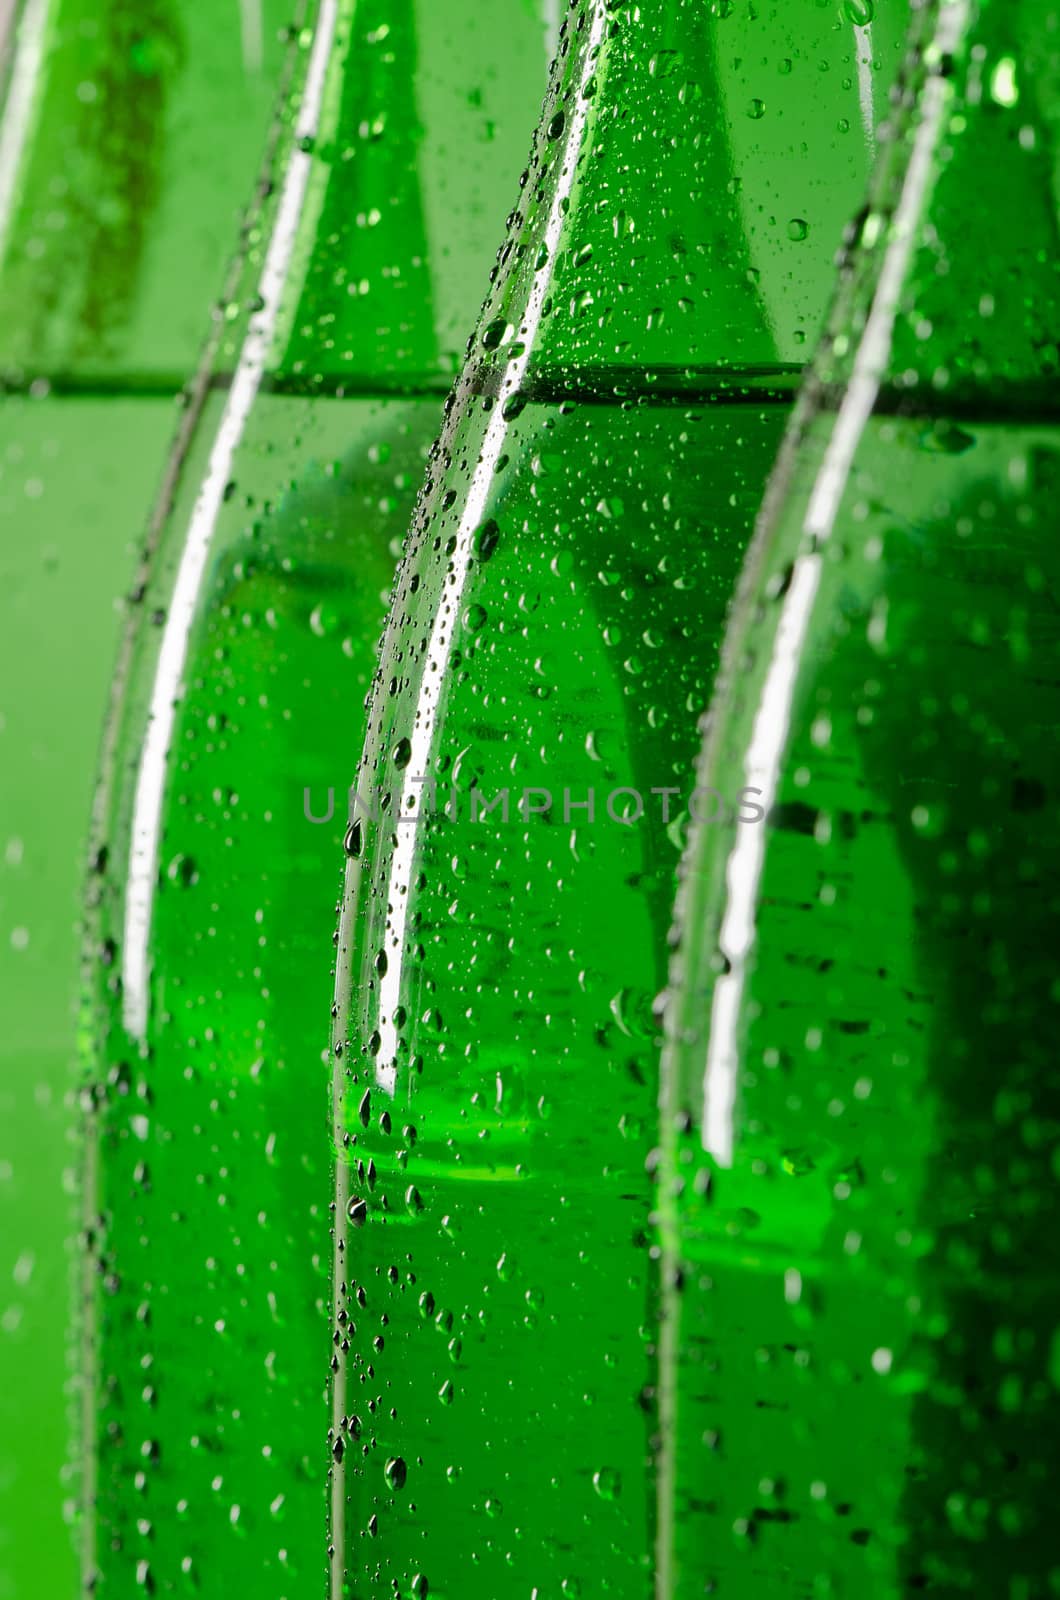 Green bottles of mineral water with water drops on it